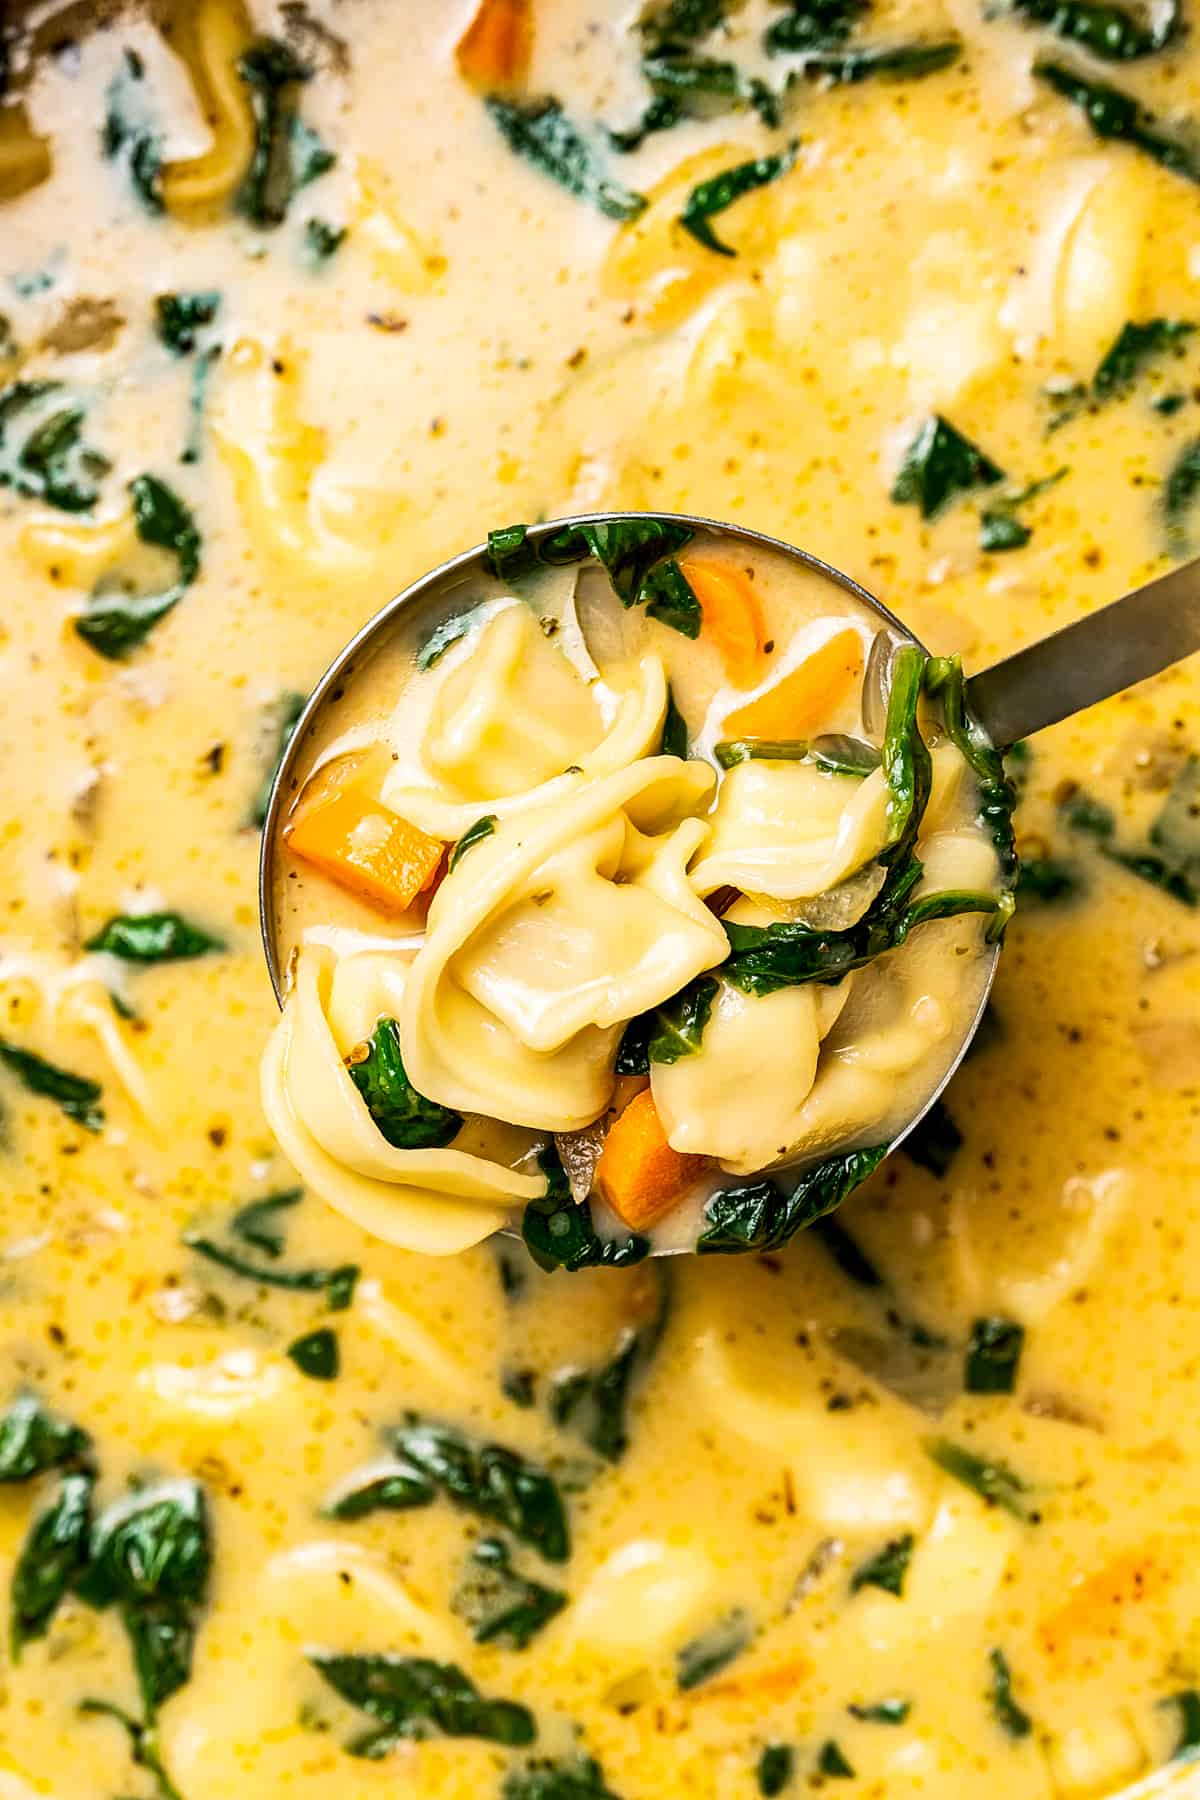 Overhead view of a ladle scooping creamy tortellini soup from a pot.